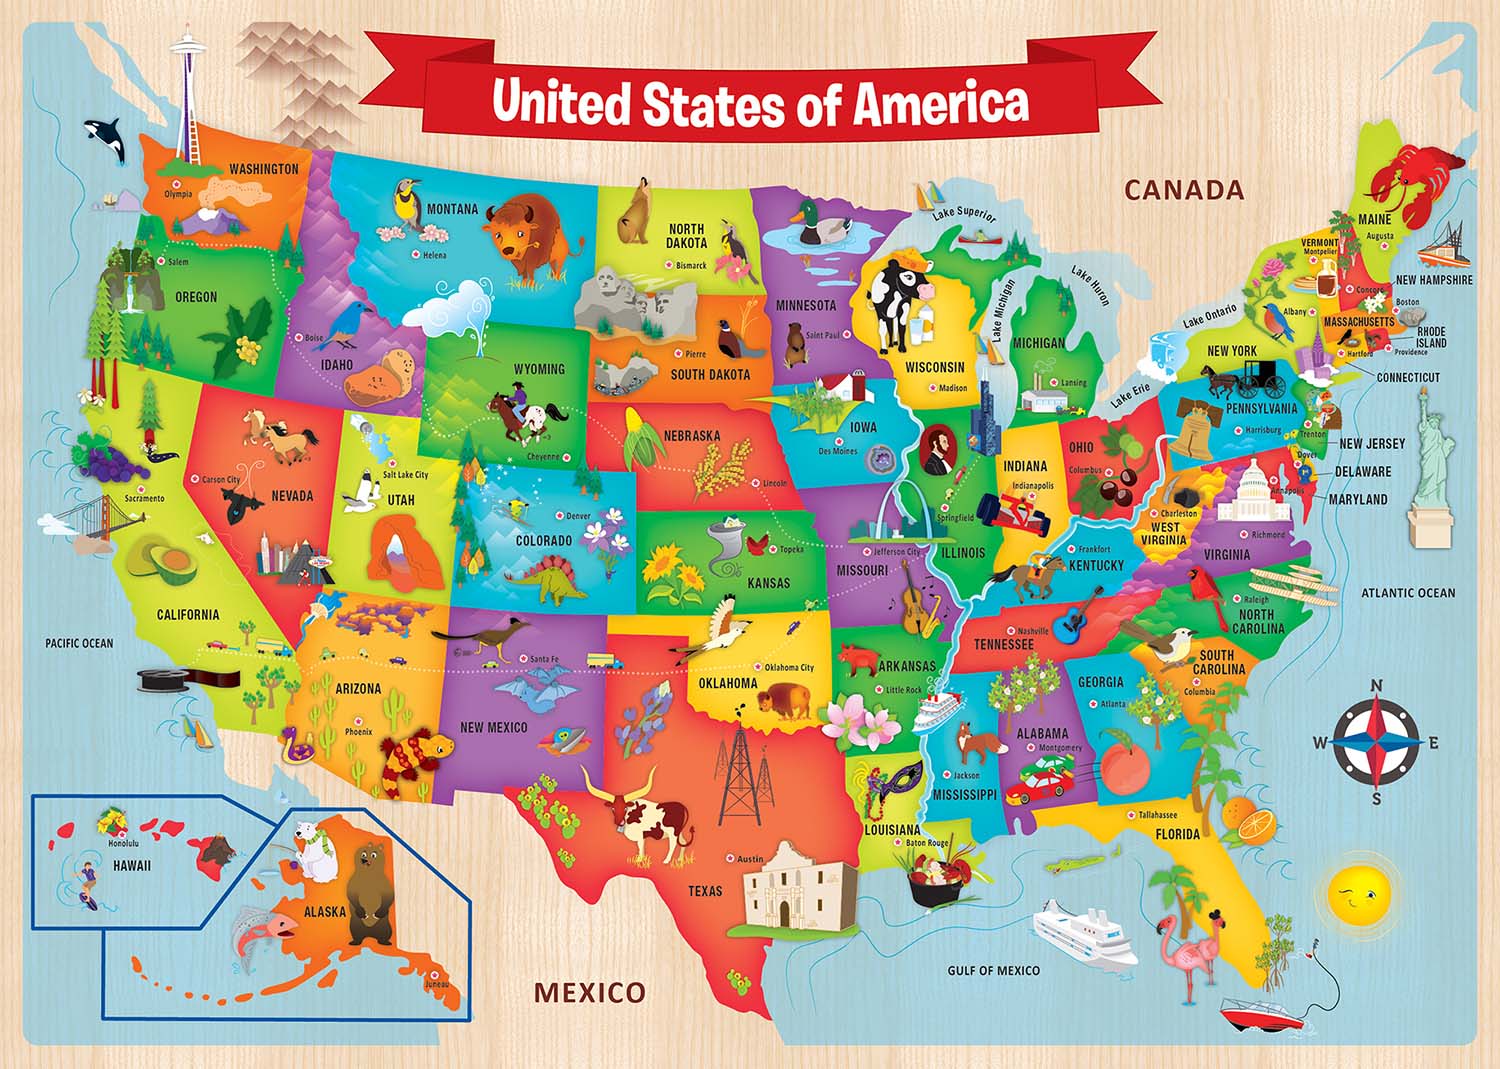 United States of America - Important General Information About USA